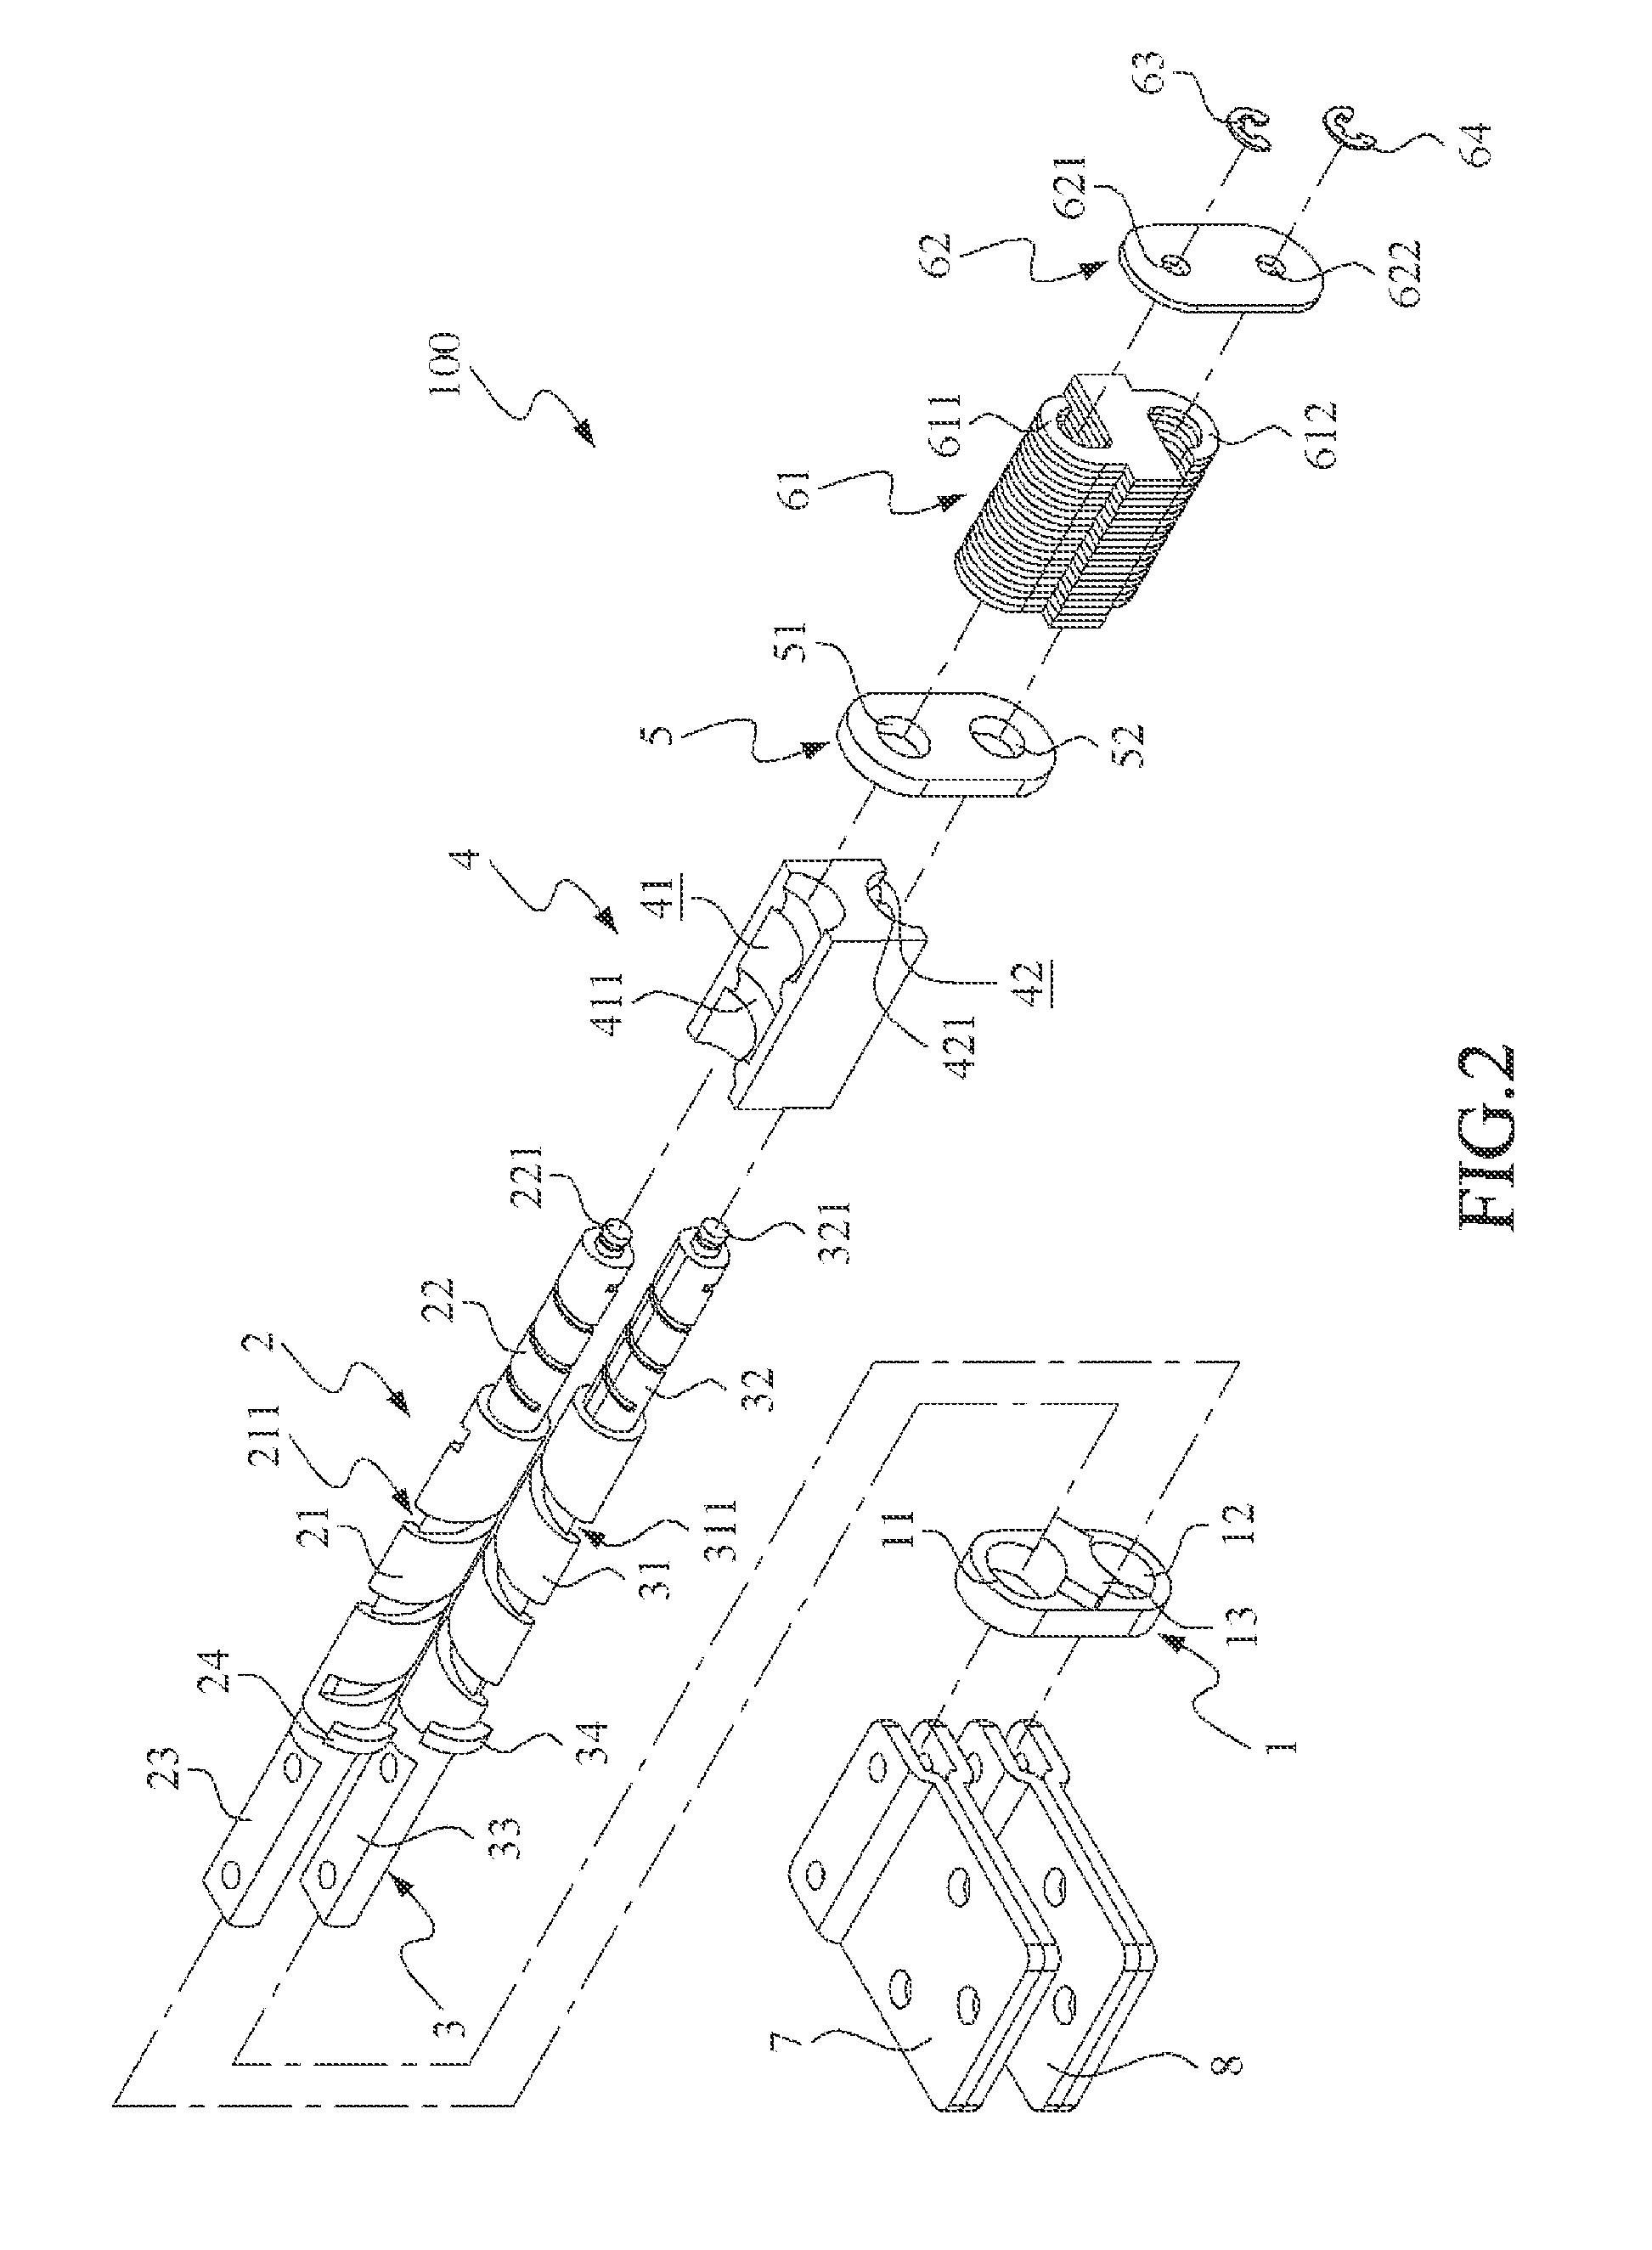 Hinge unit with simultaneous rotatable axles